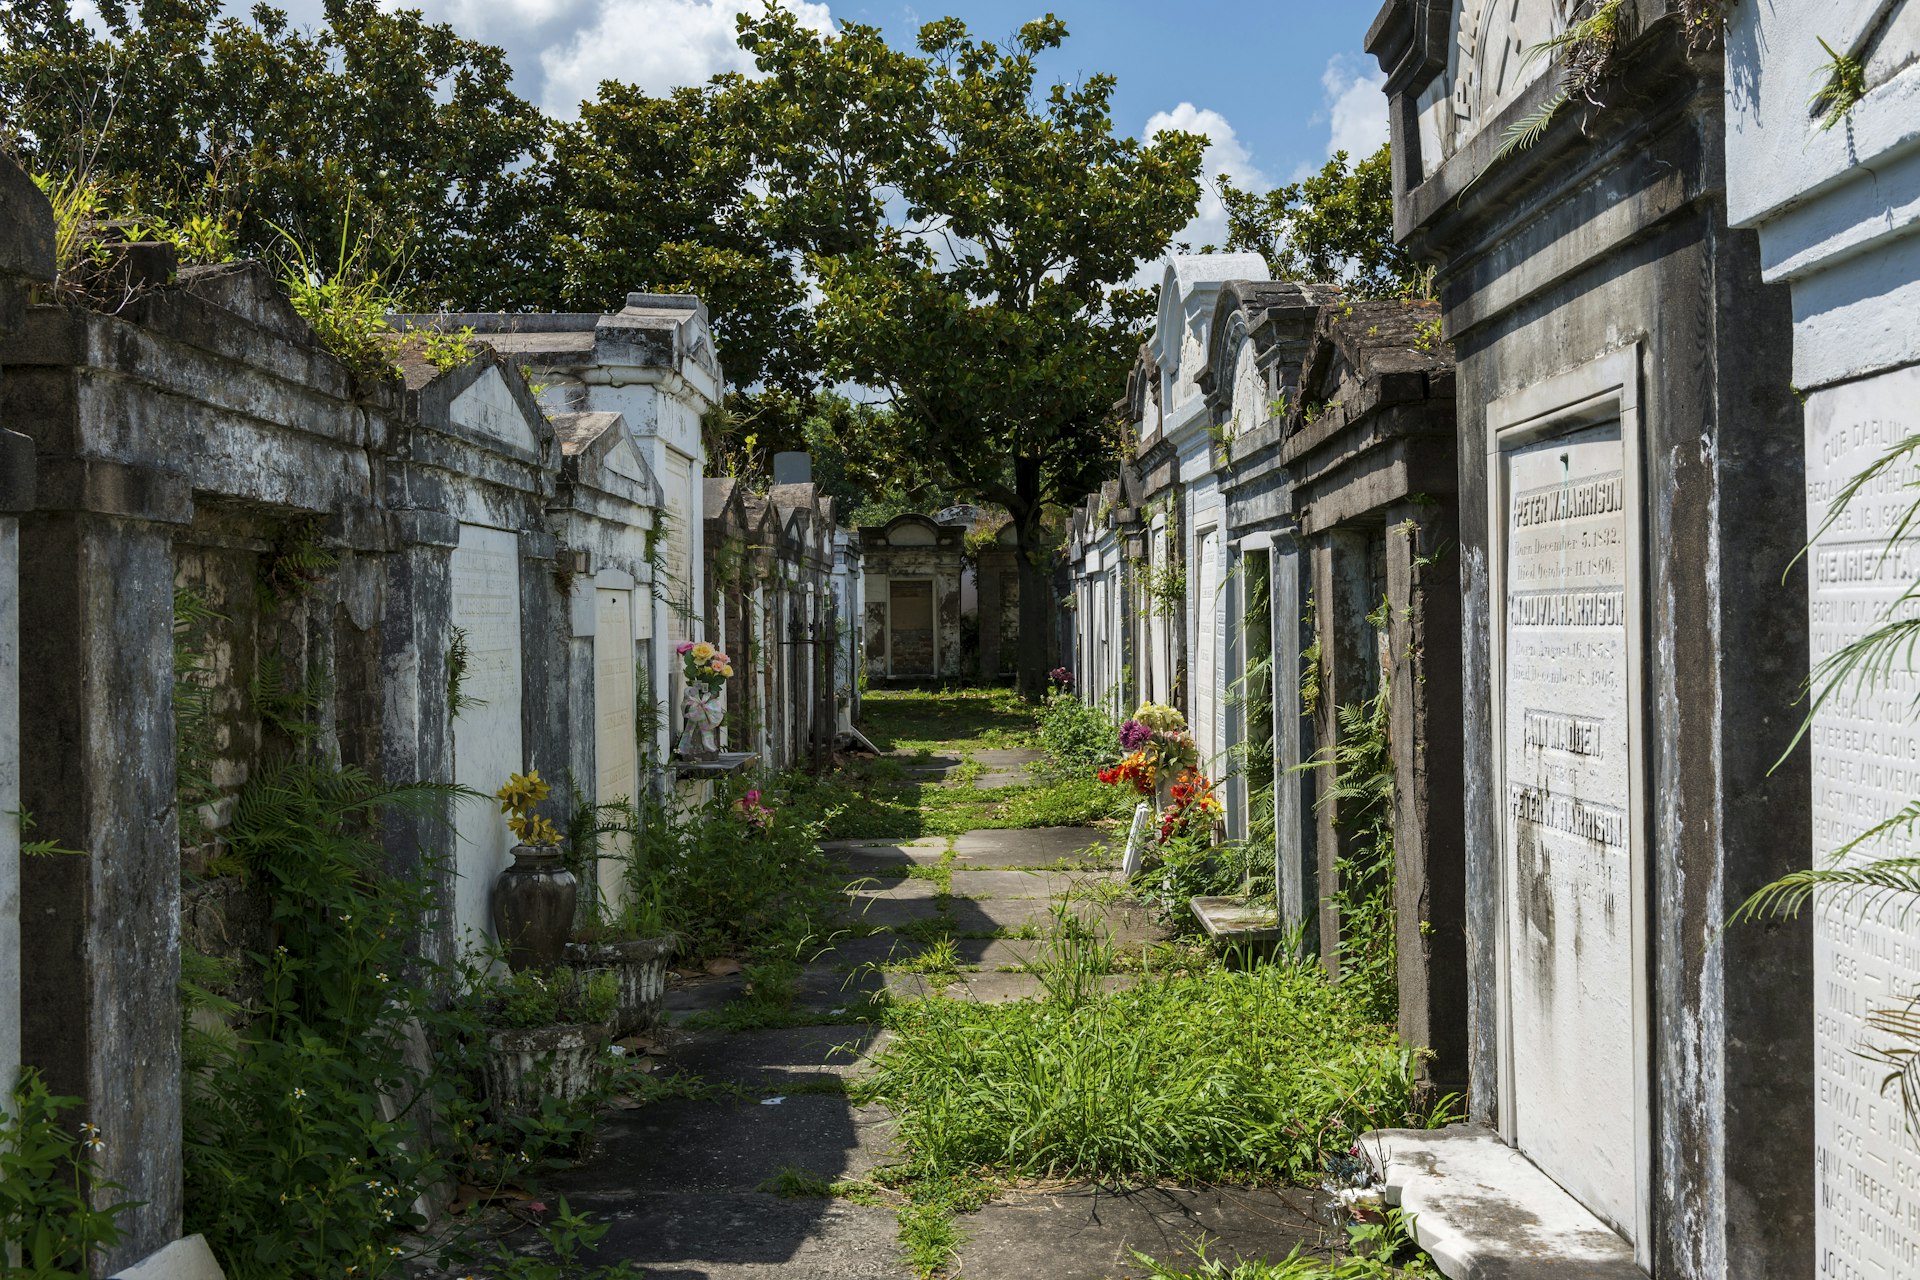 Rows of tombs at the Lafayette Cemetery No. 1 in the city of New Orleans, Louisiana